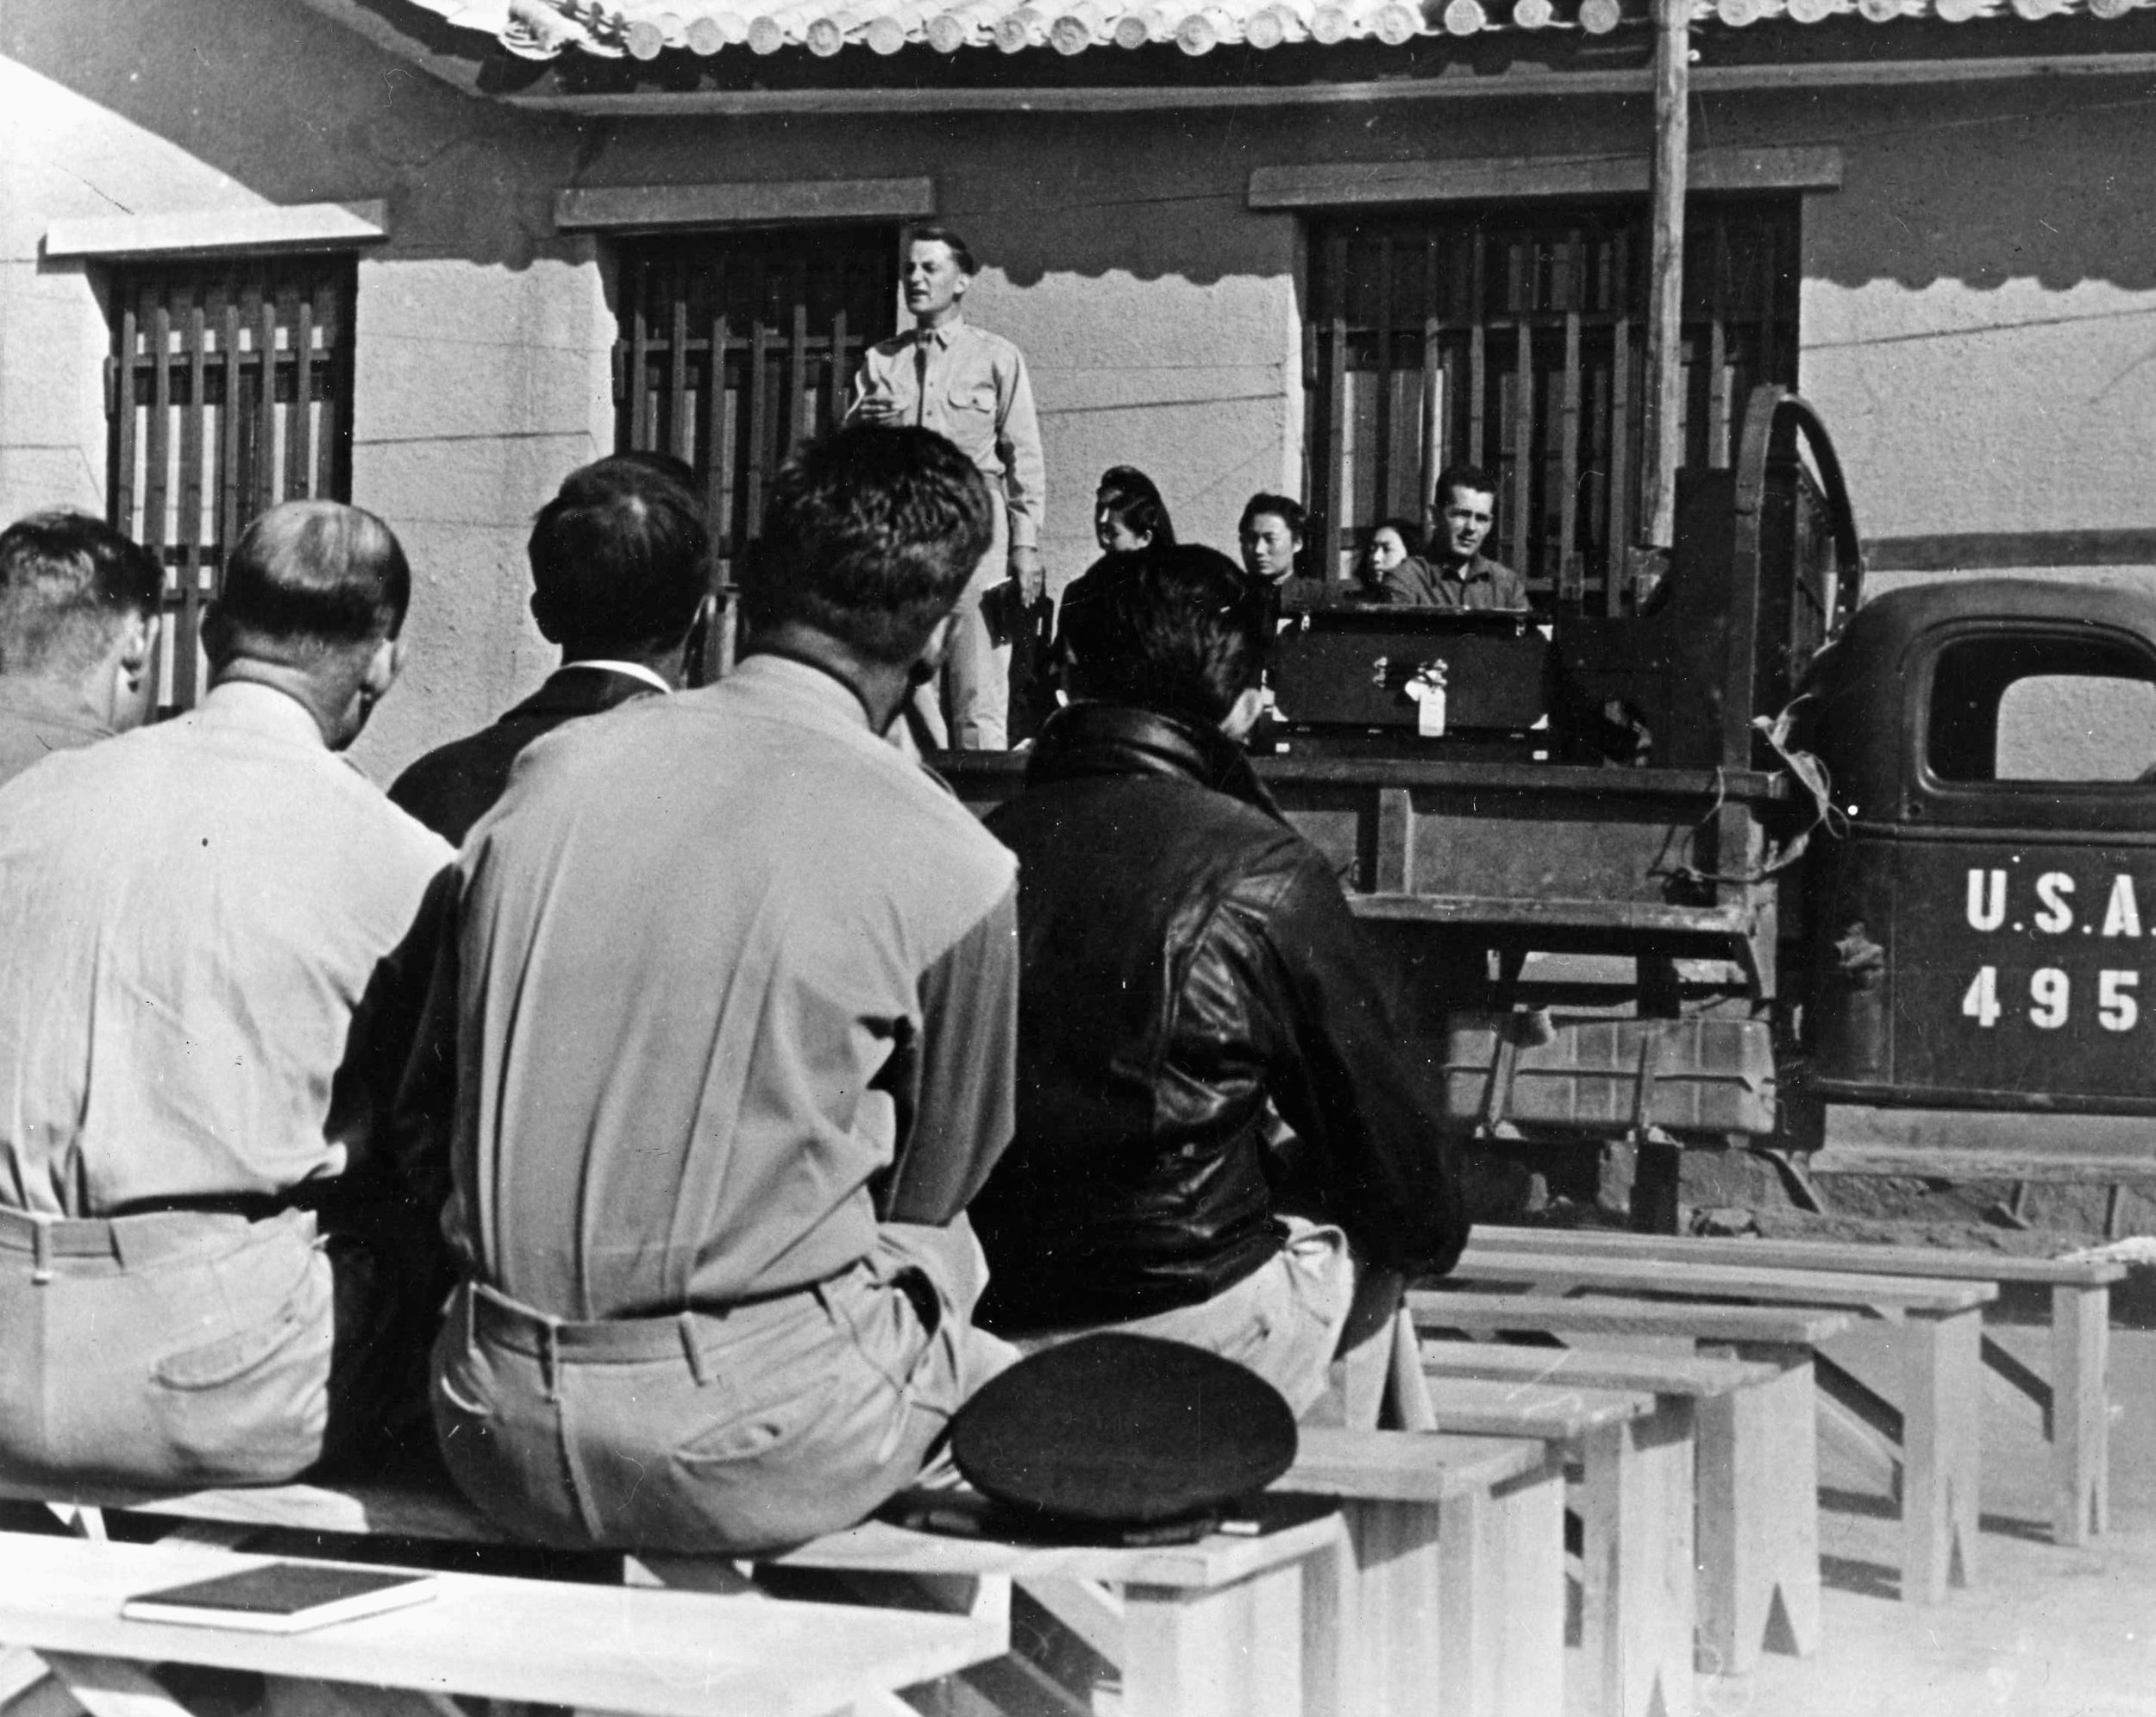 Men of the U.S. Fourteenth Air Force attend Sunday church services at their base in China. John Birch was initially drawn to the Asian mainland as a Christian missionary.